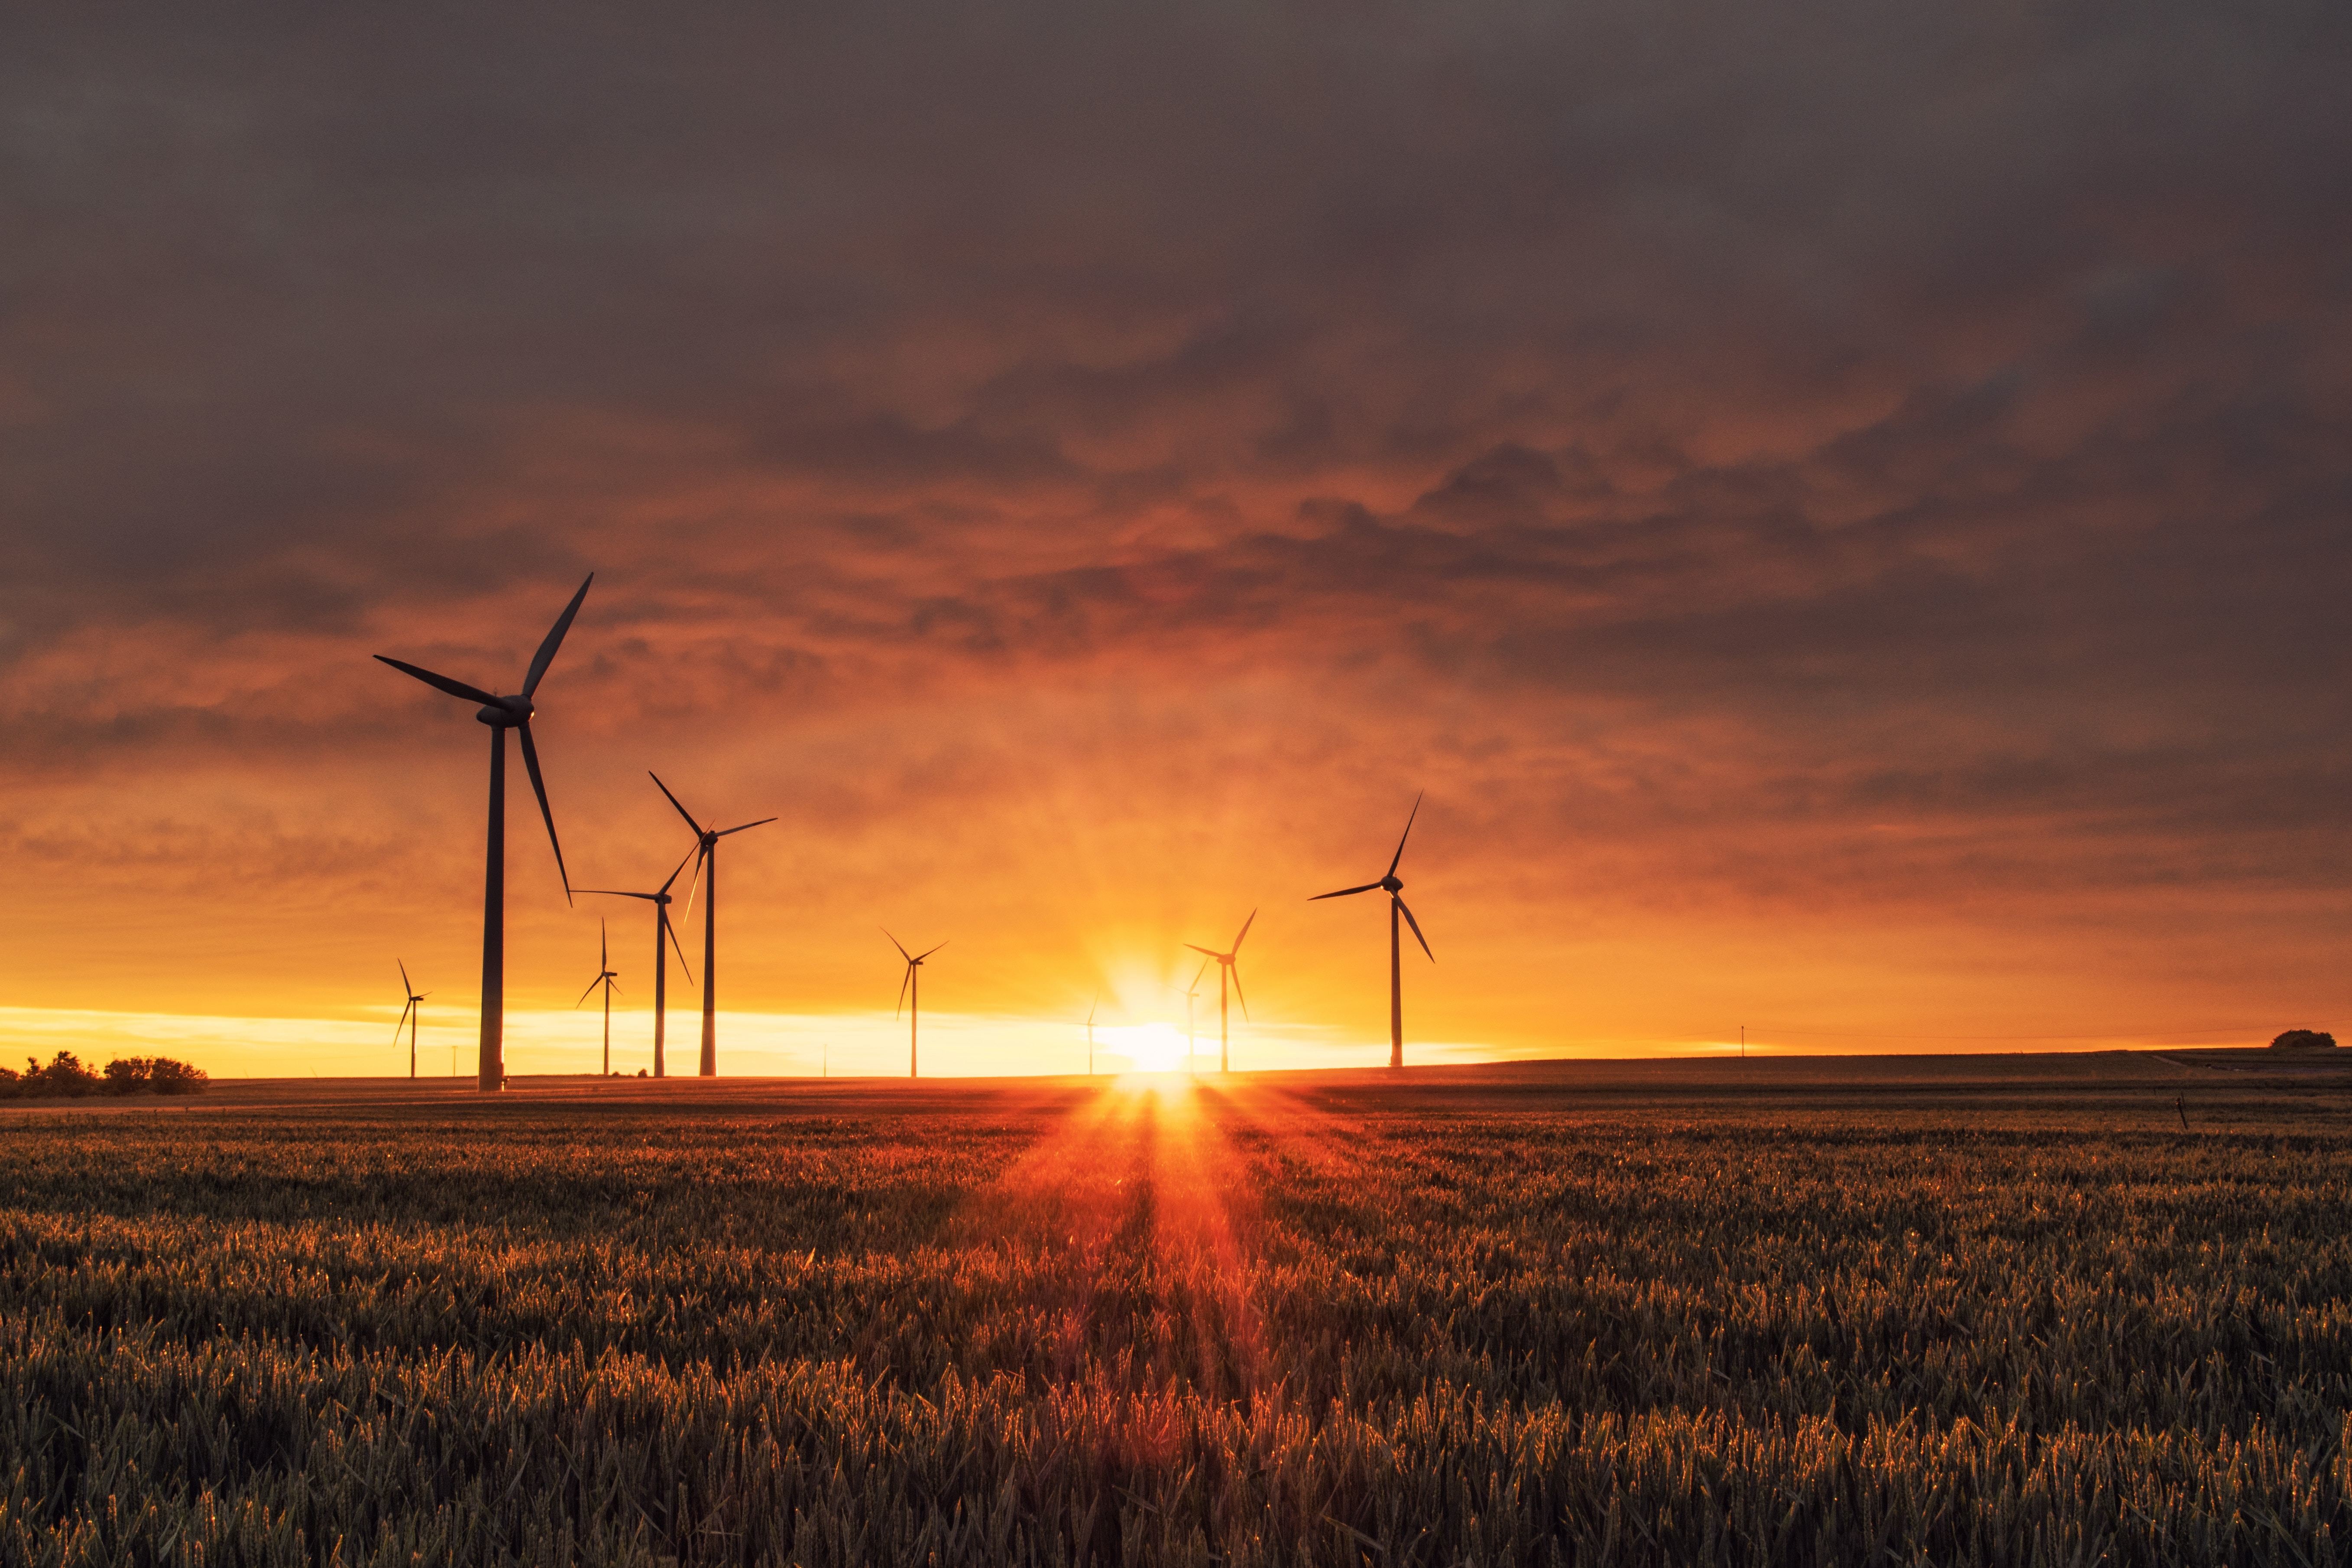 WInd turbines at sunrise, illustrating the need for more climate finance initiatives